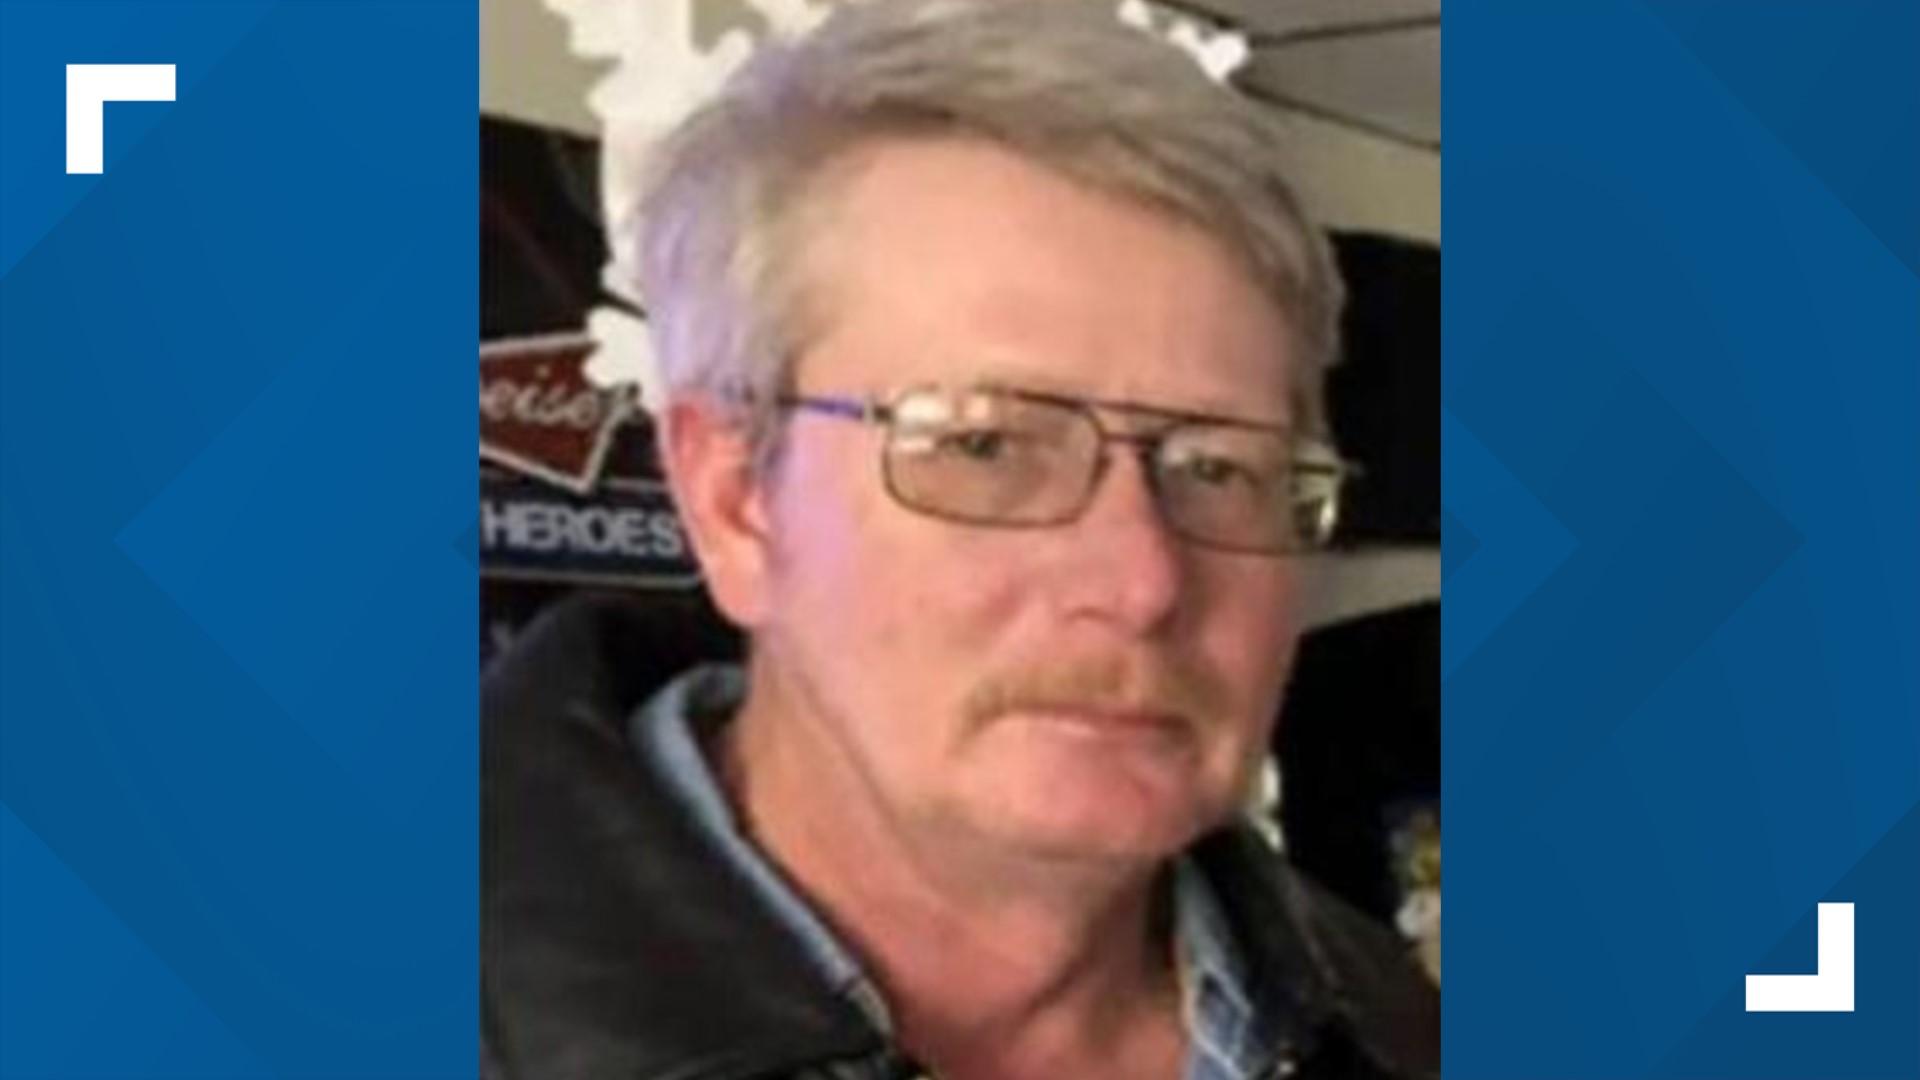 Search crews are still looking for a second missing man, David Schultz. Authorities say the two disappearances are not related.